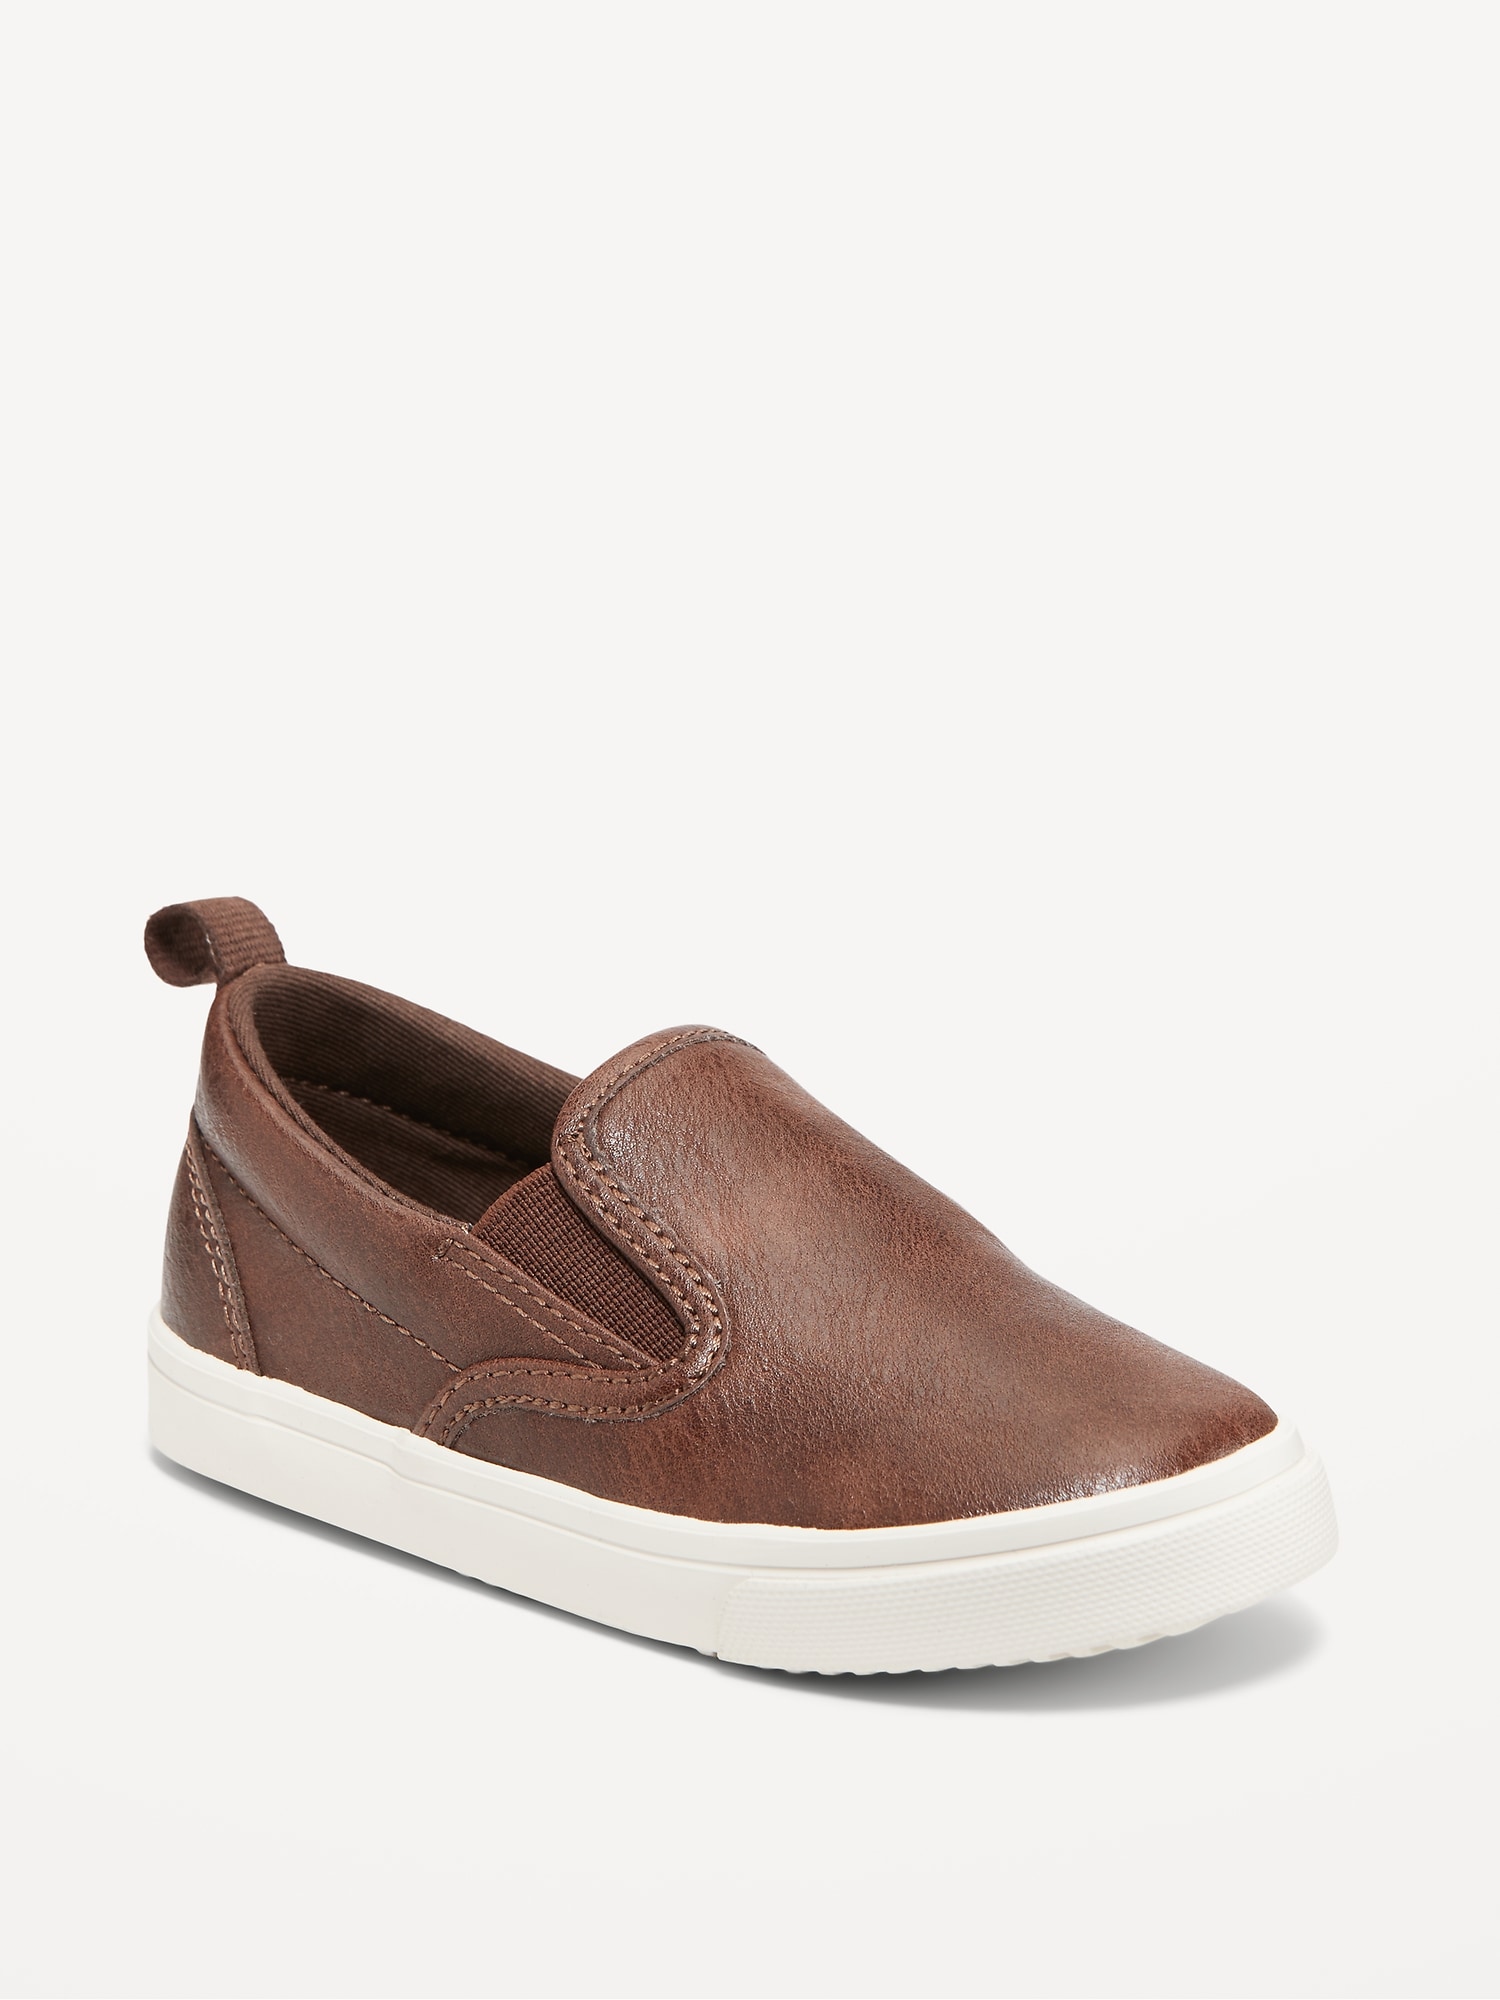 Women's Rally Leather Slip On Skate Sneakers | FitFlop US